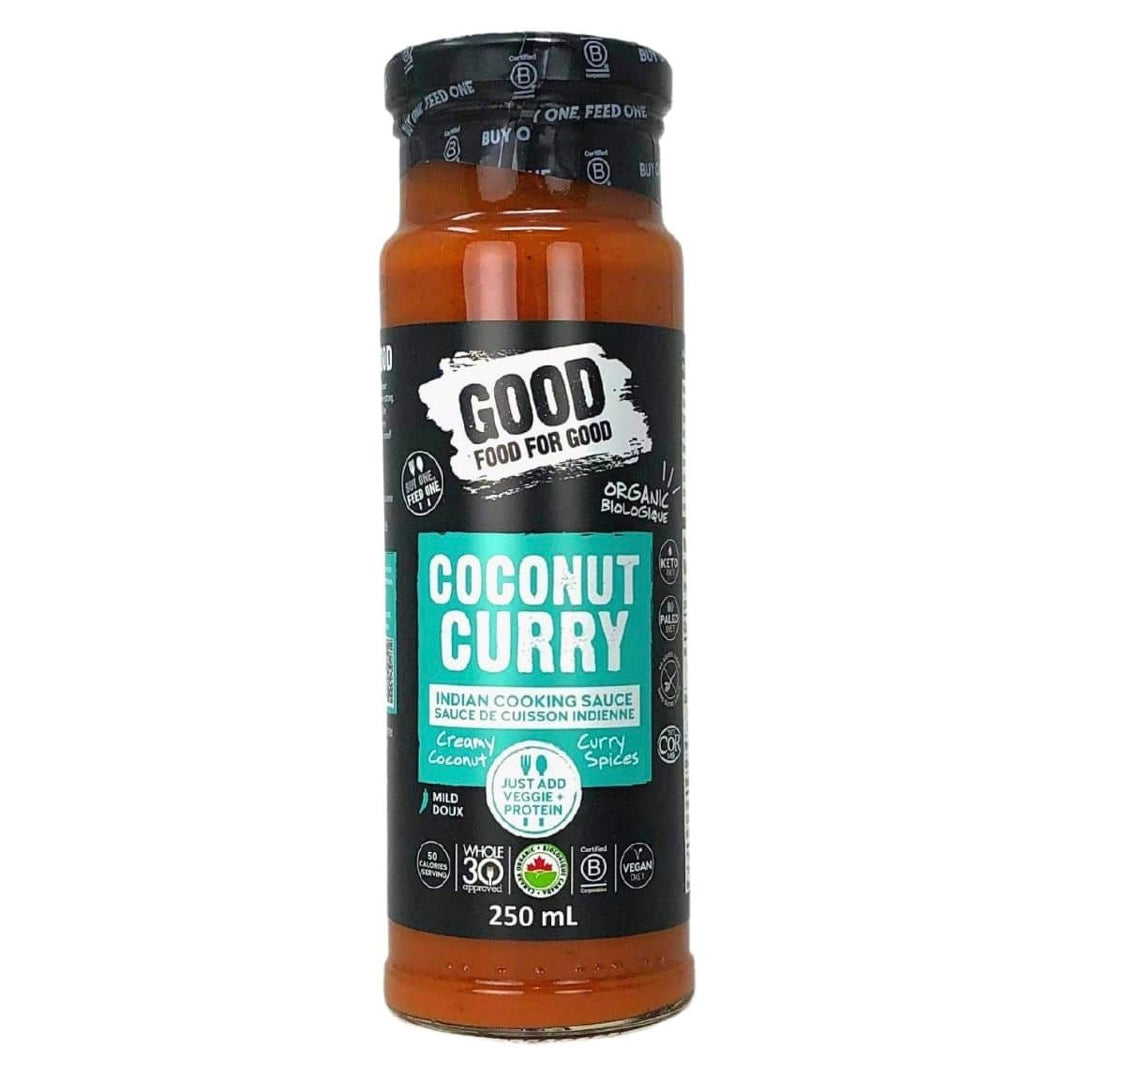 Good Food For Good Organic Cooking Sauce Coconut Curry, 250ml